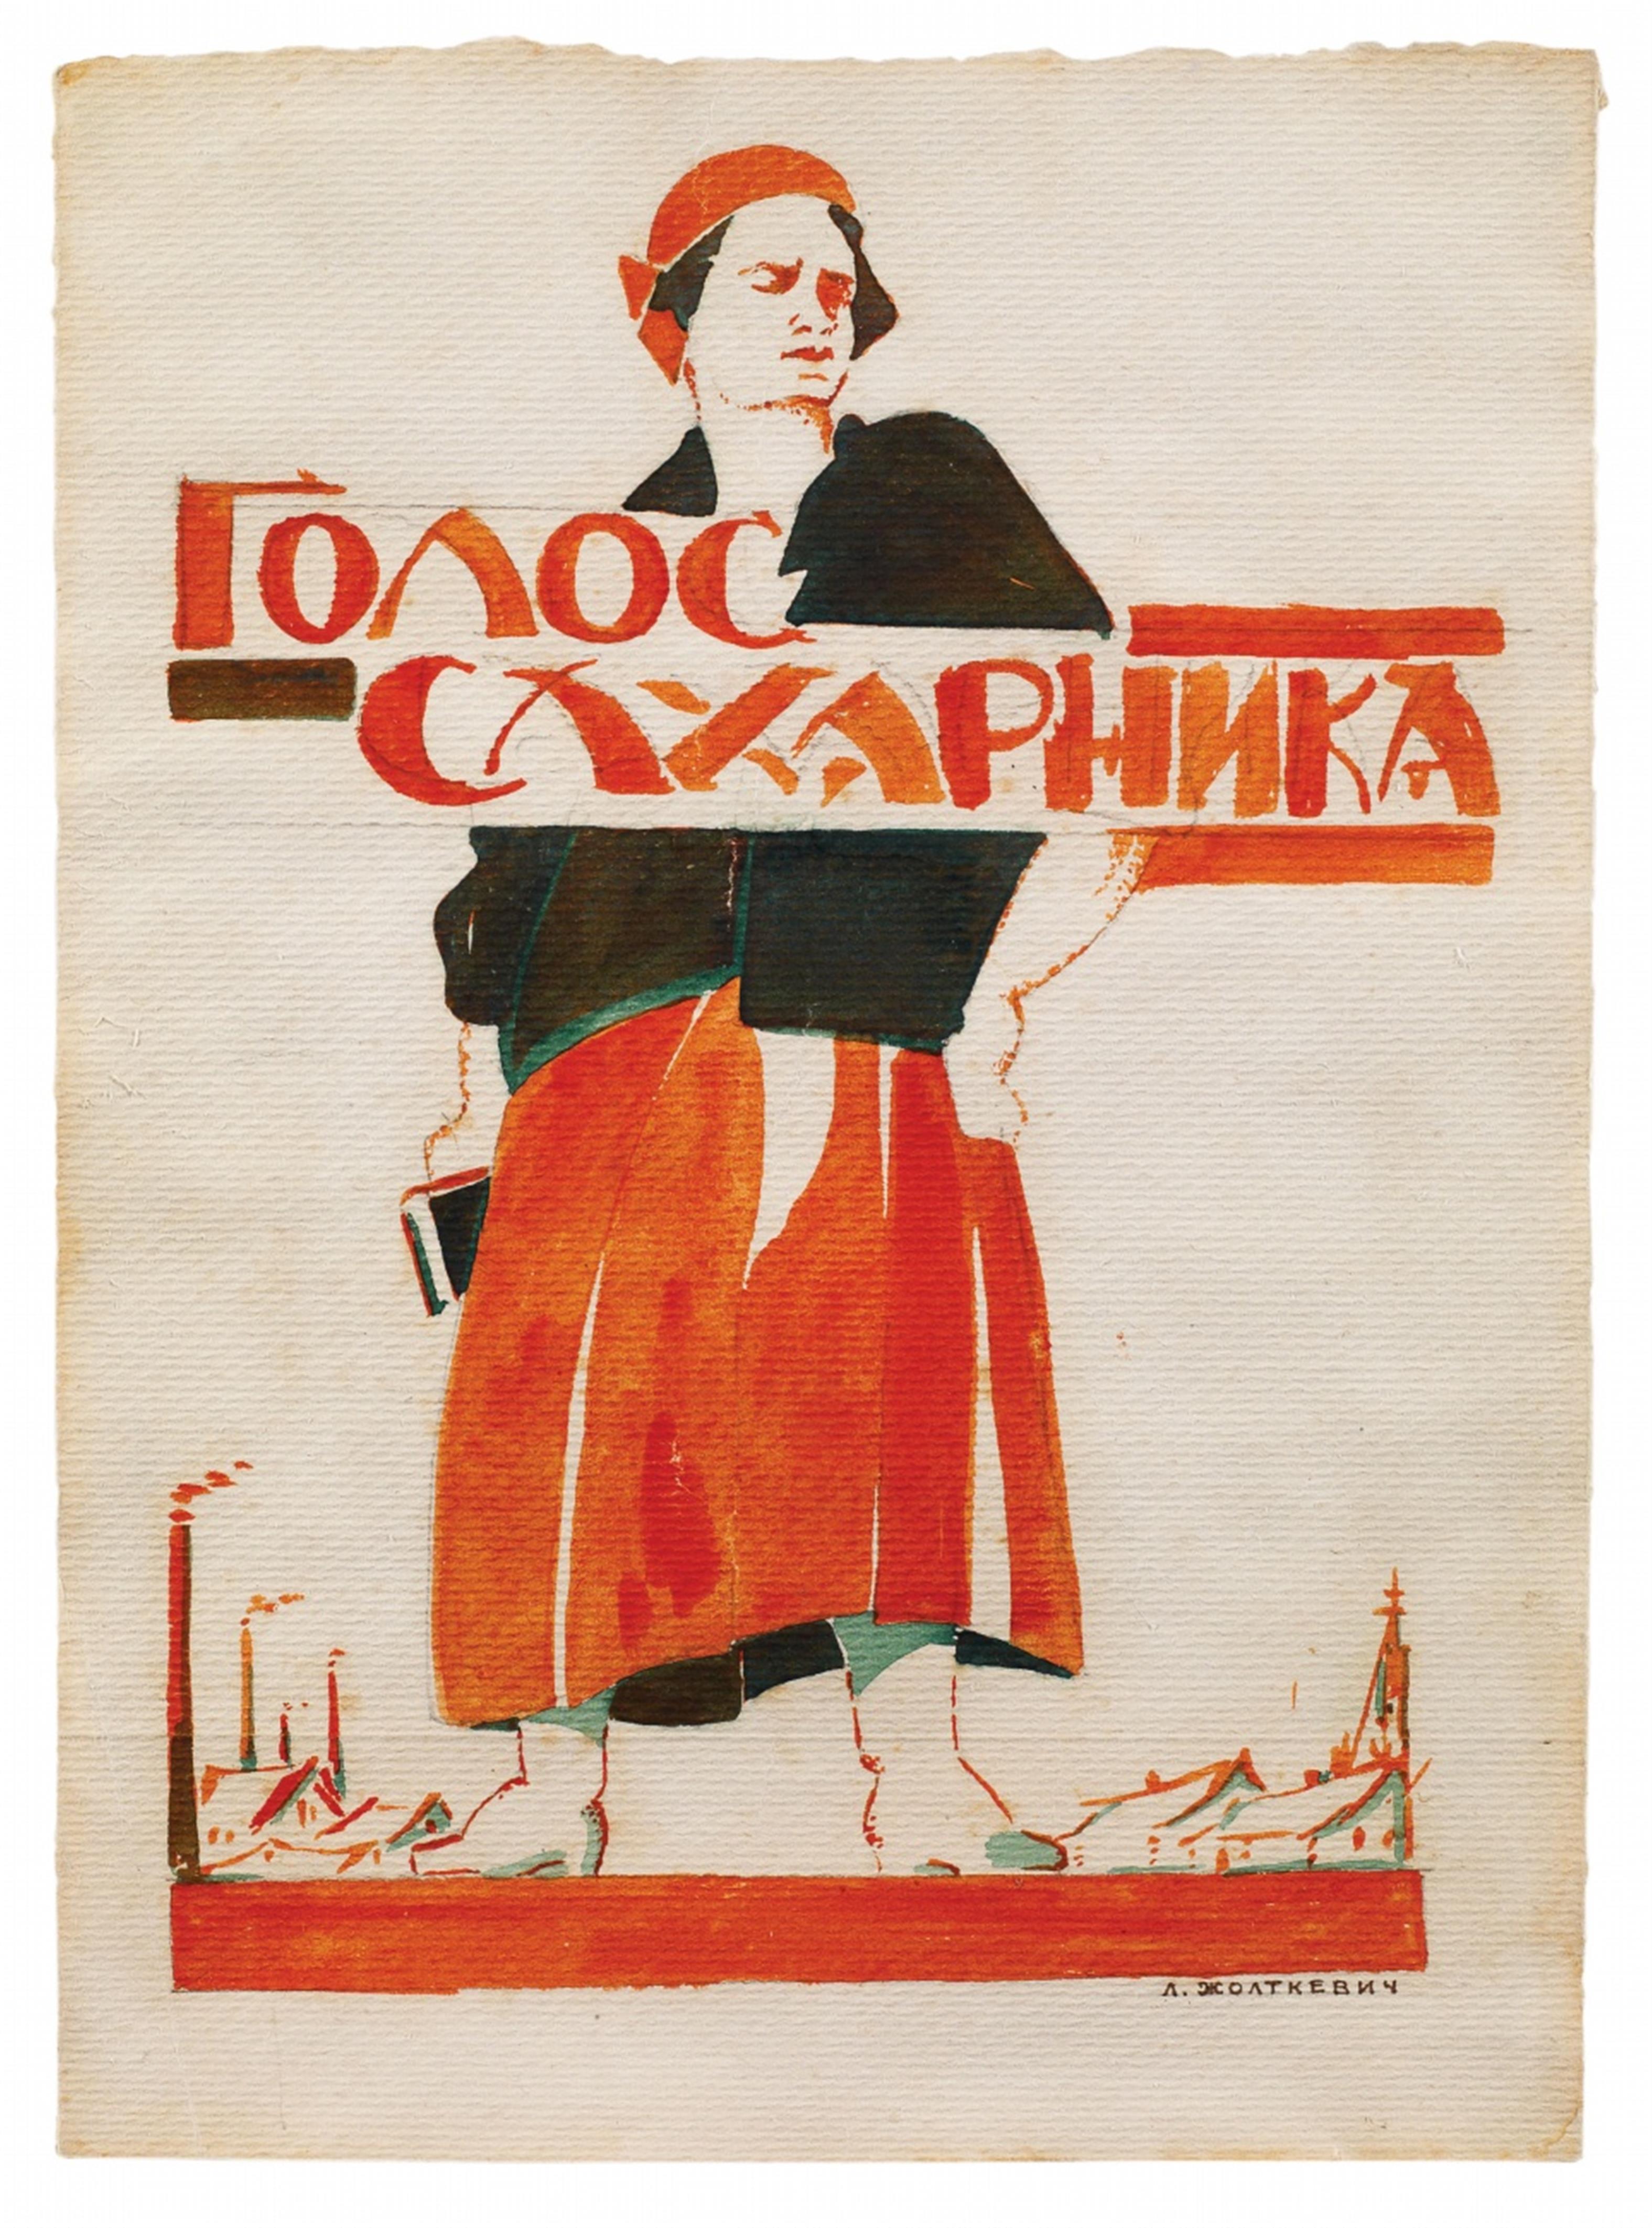 Lidia Alexandrovna Scholtkevich - "The Voice of the Sugar Factory Workers" - image-1